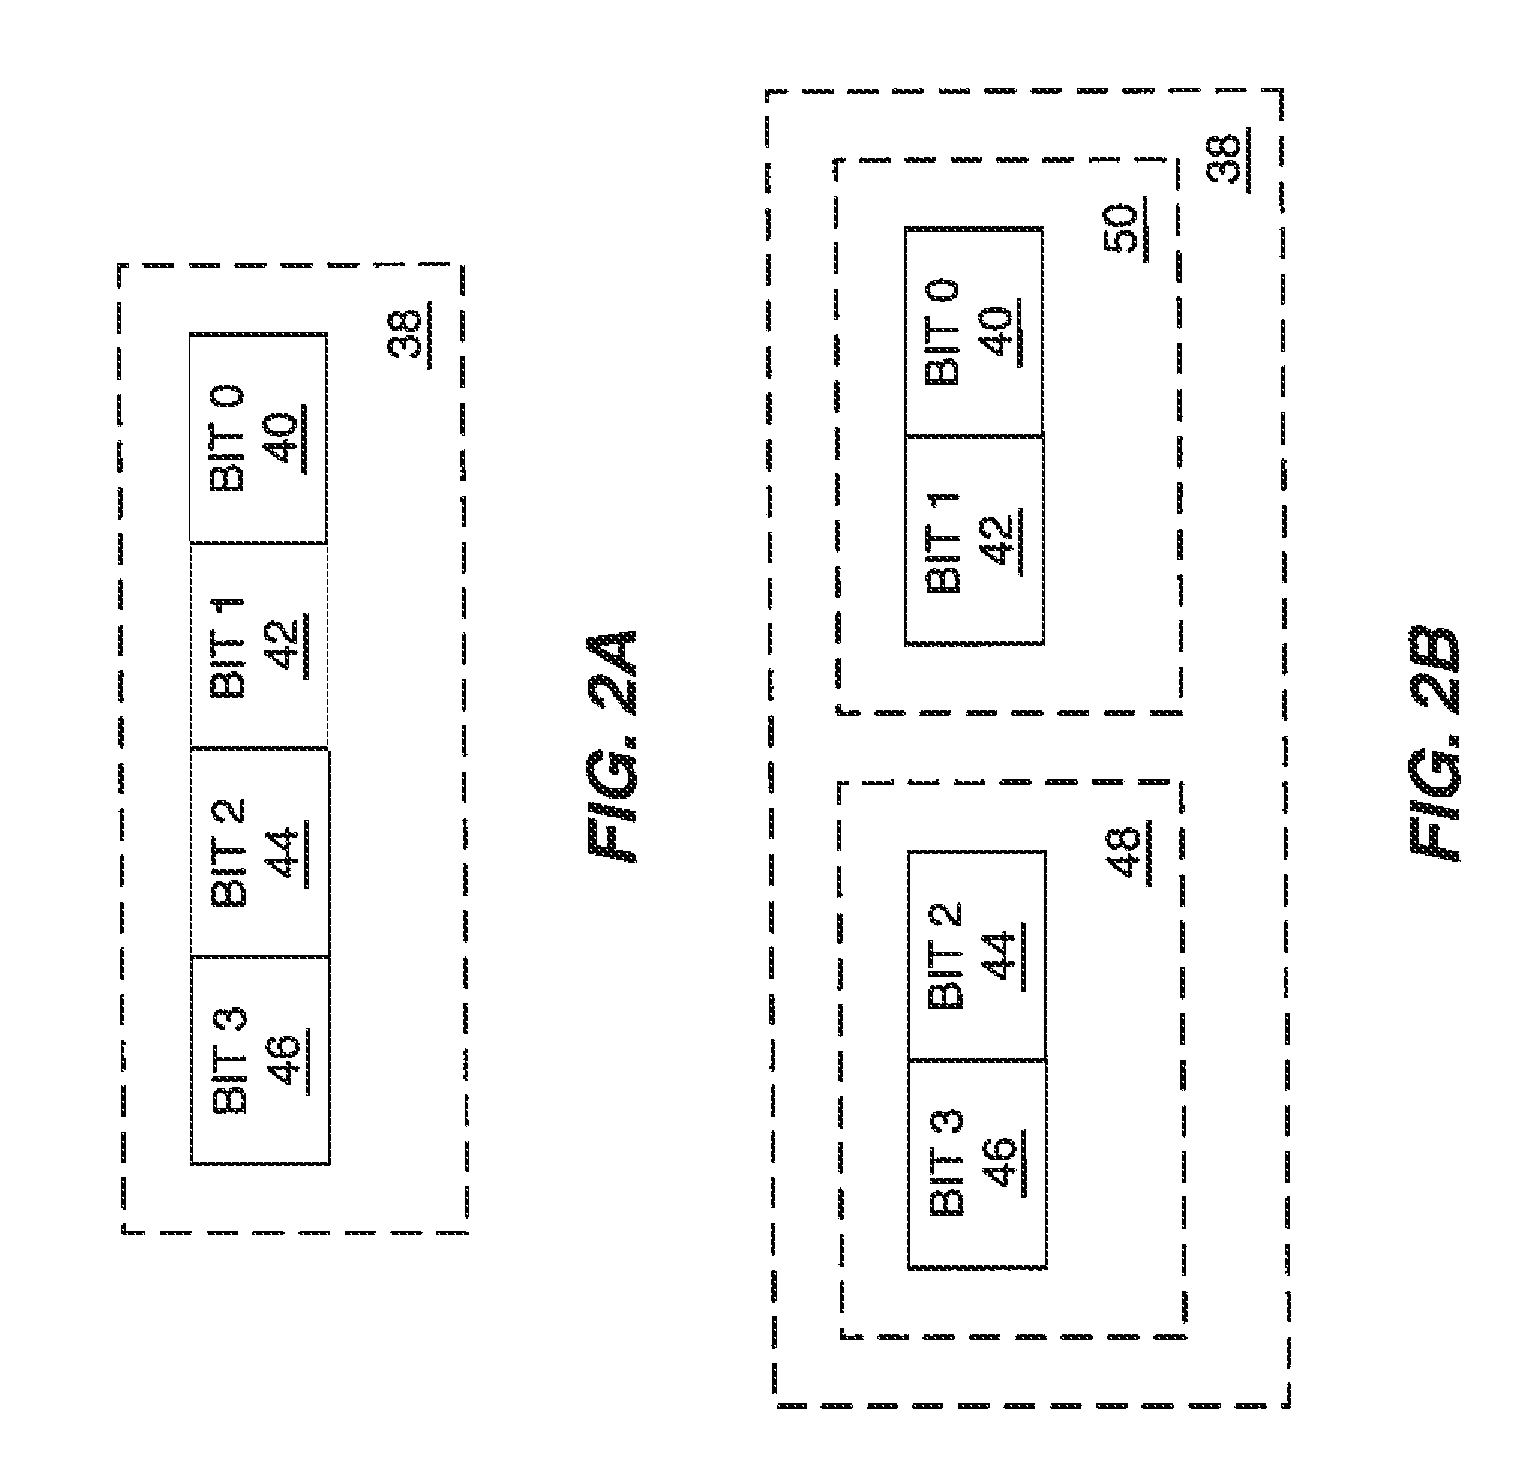 Modulation division multiple access